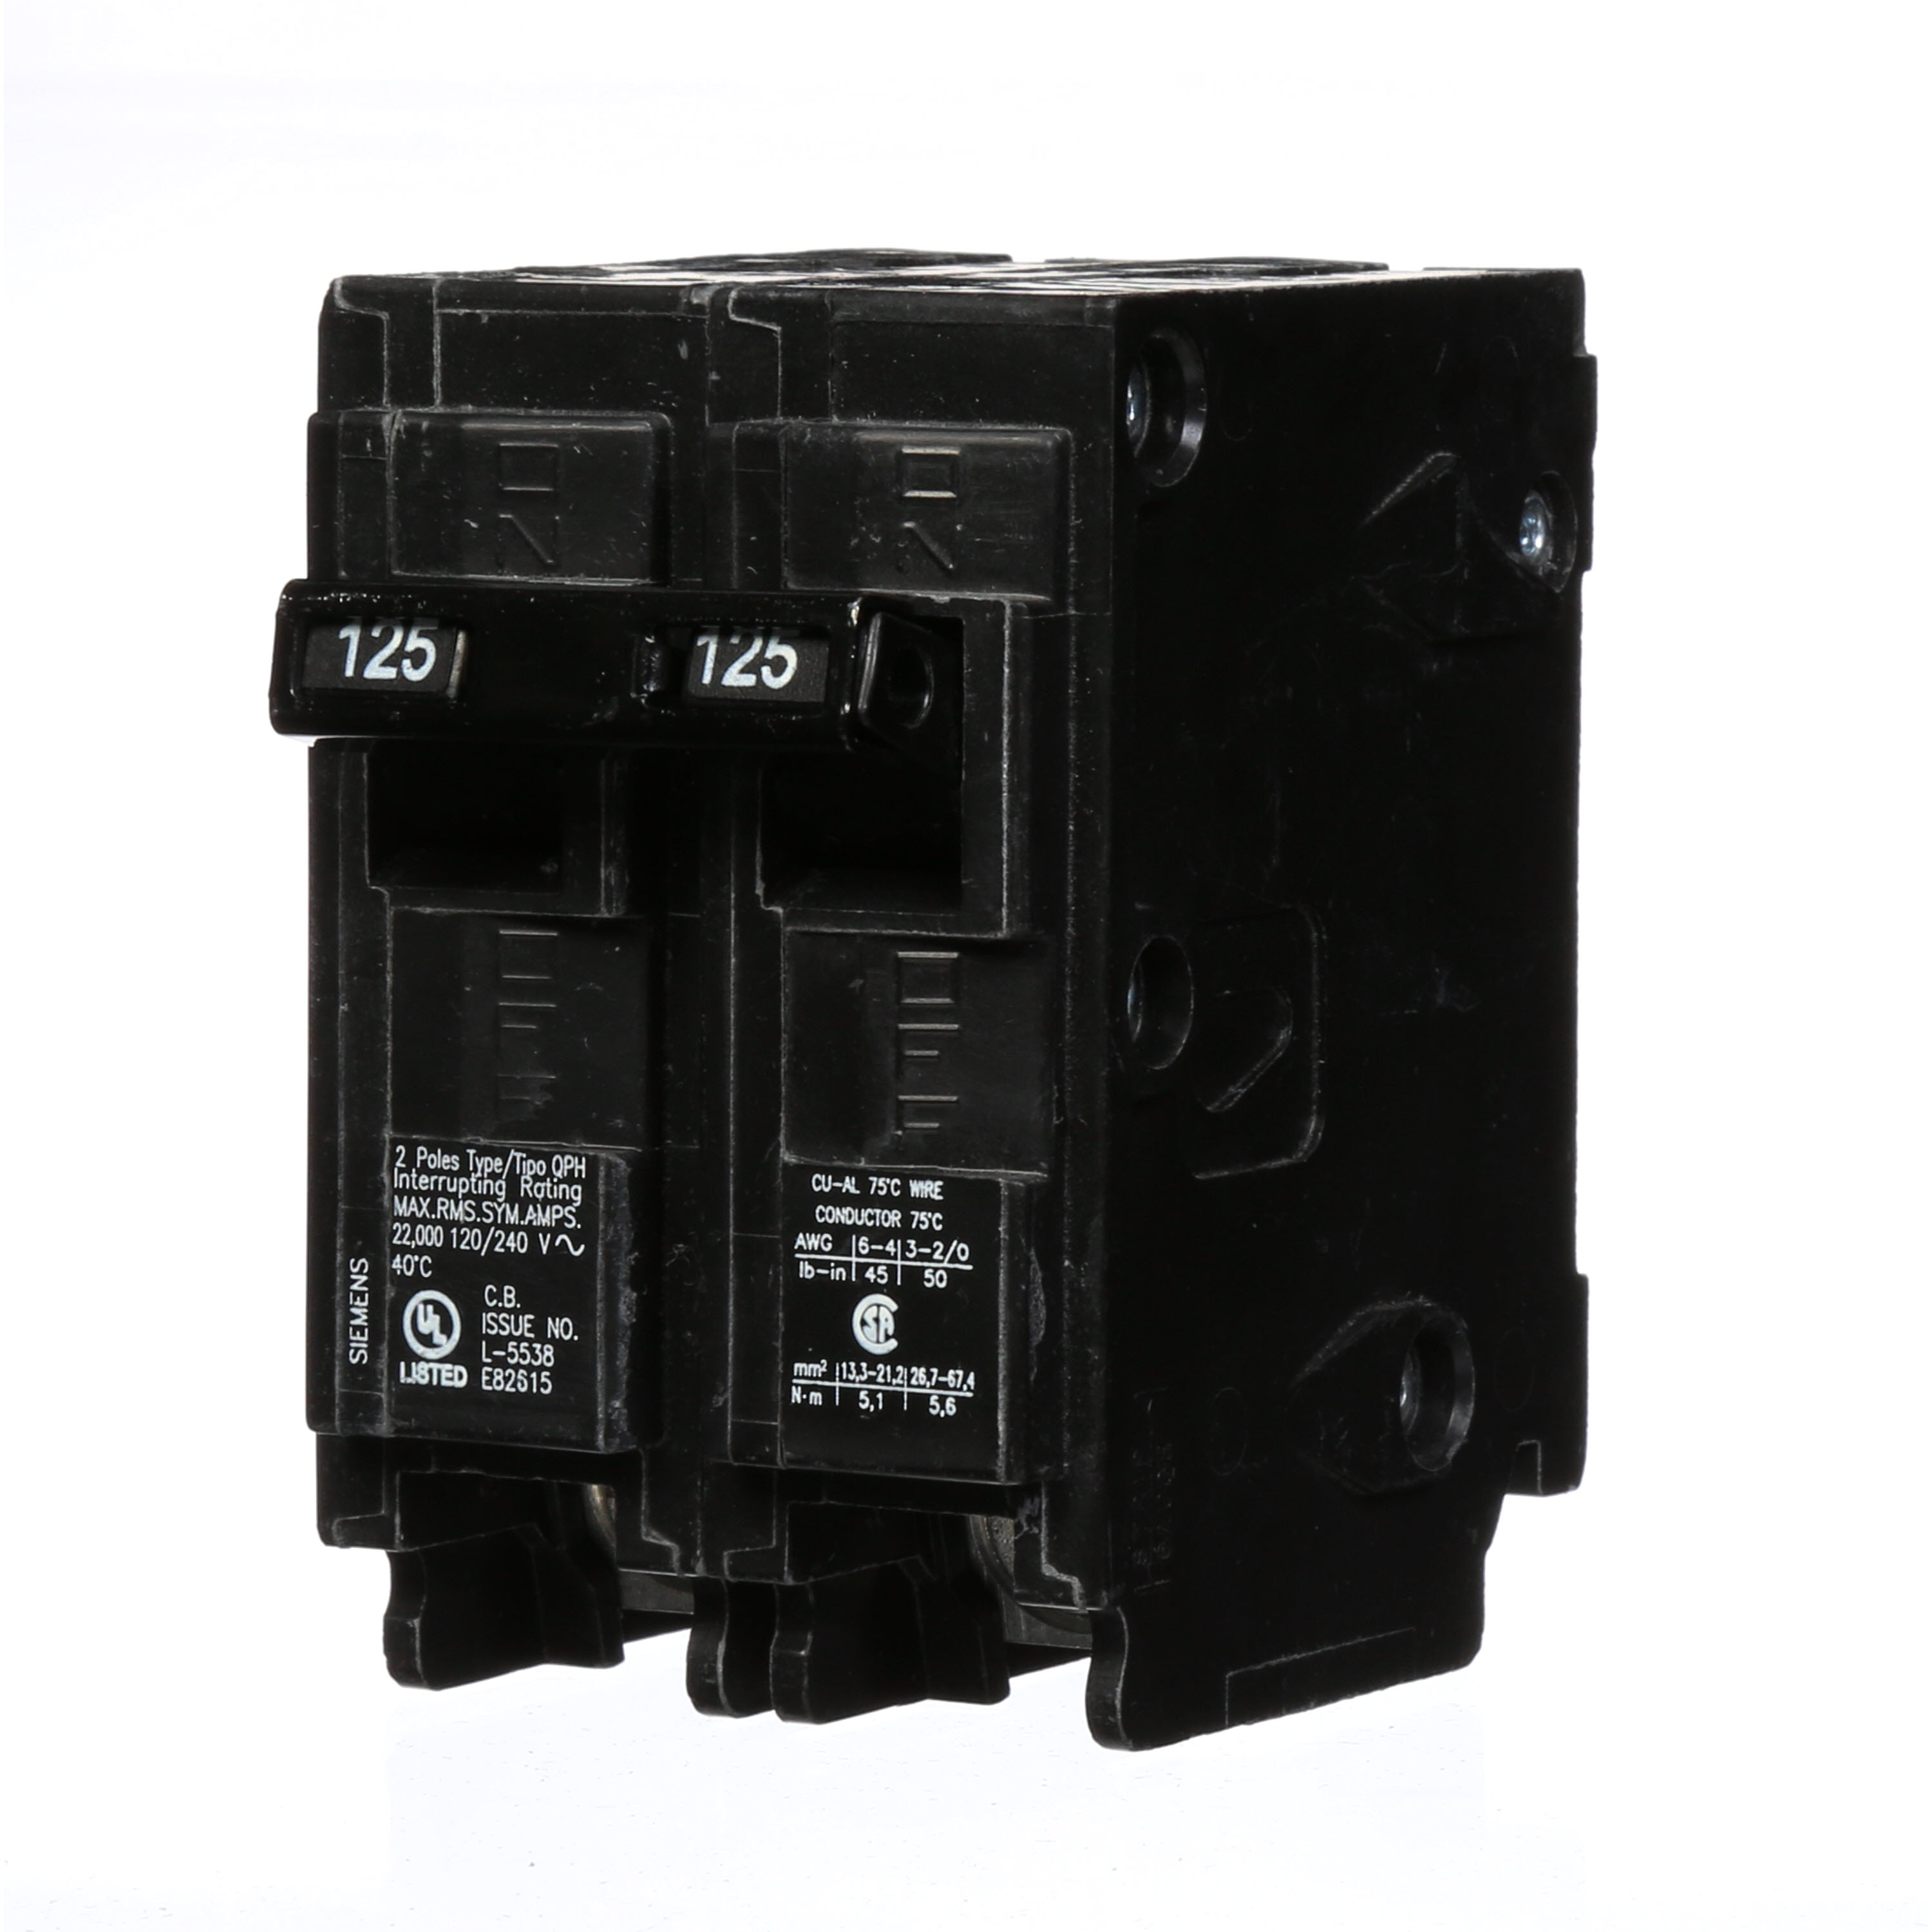 Siemens Low Voltage Residential Circuit Breakers Miniature Thermal Mag Circuit Breakers - Type QP/MP, 2-Pole, 120/240VAC are Circuit Protection Load Center Mains, Feeders, and Miniature Circuit Breakers. Type QP/MP Application Electrical Distribution Standard UL 489 Voltage Rating 120/240V Amperage Rating 125A Trip Range Thermal Magnetic Interrupt Rating 22 AIC Number Of Poles 2P